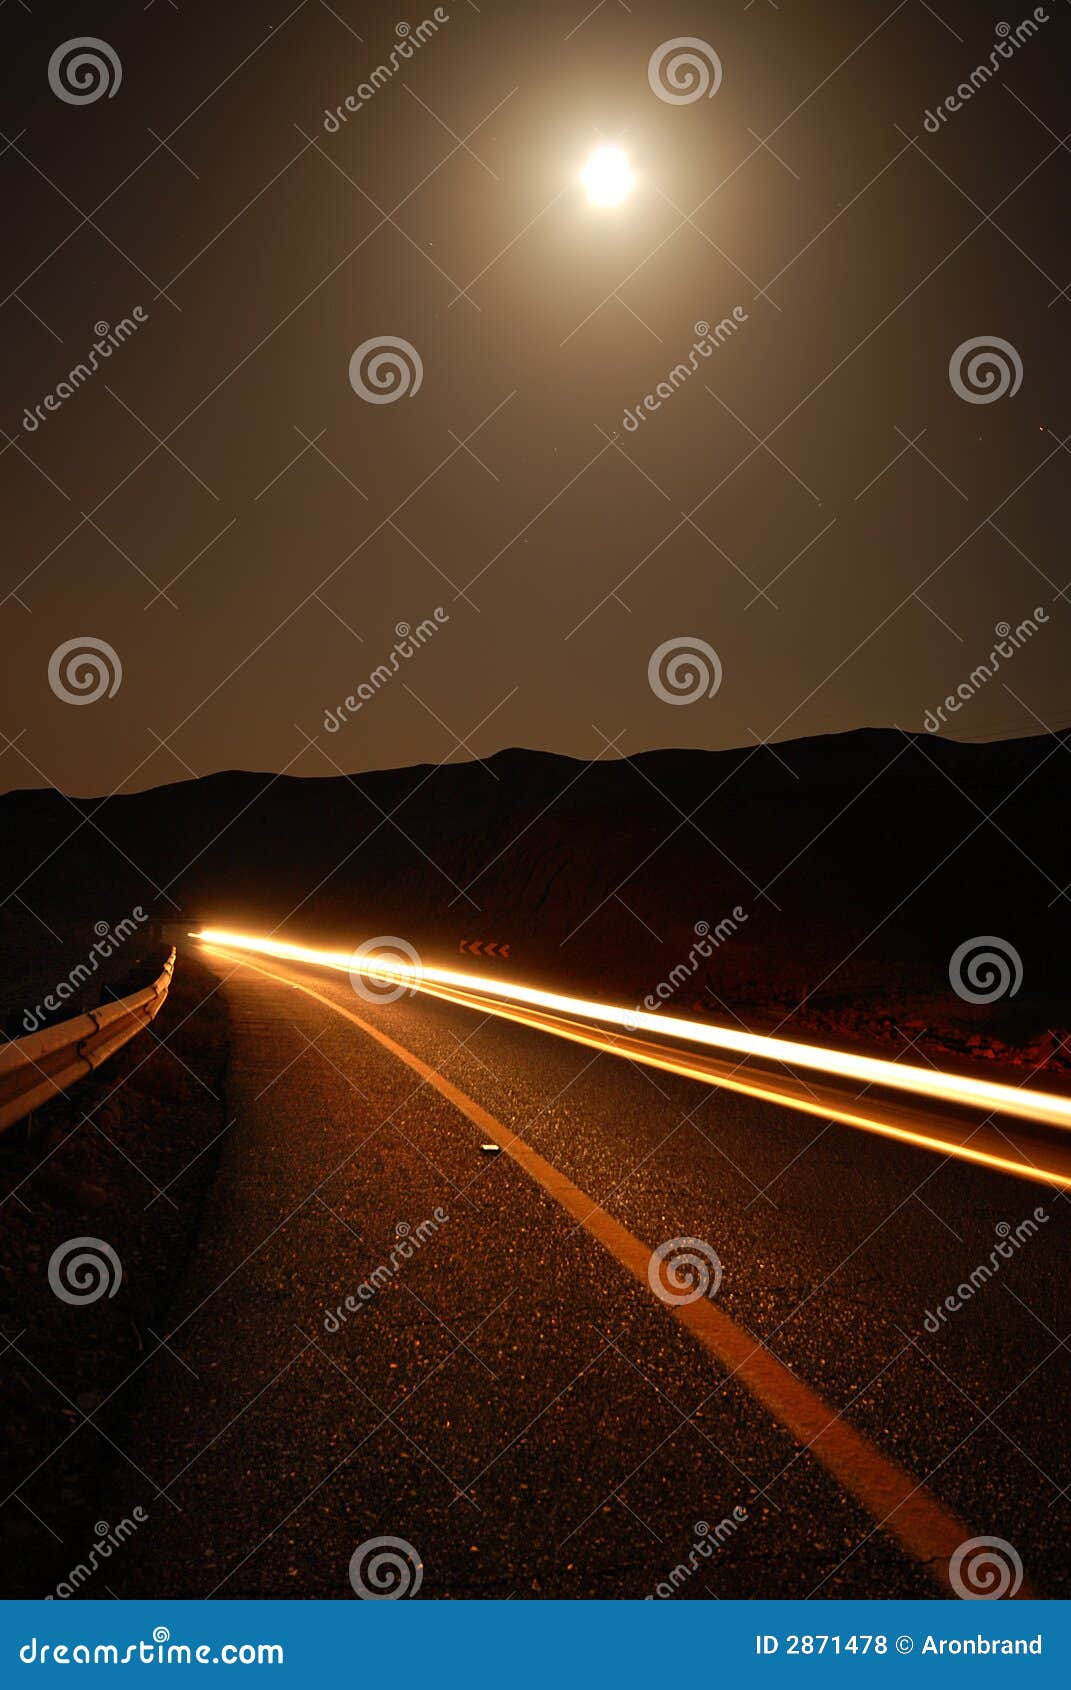 a moonlit road with car trails